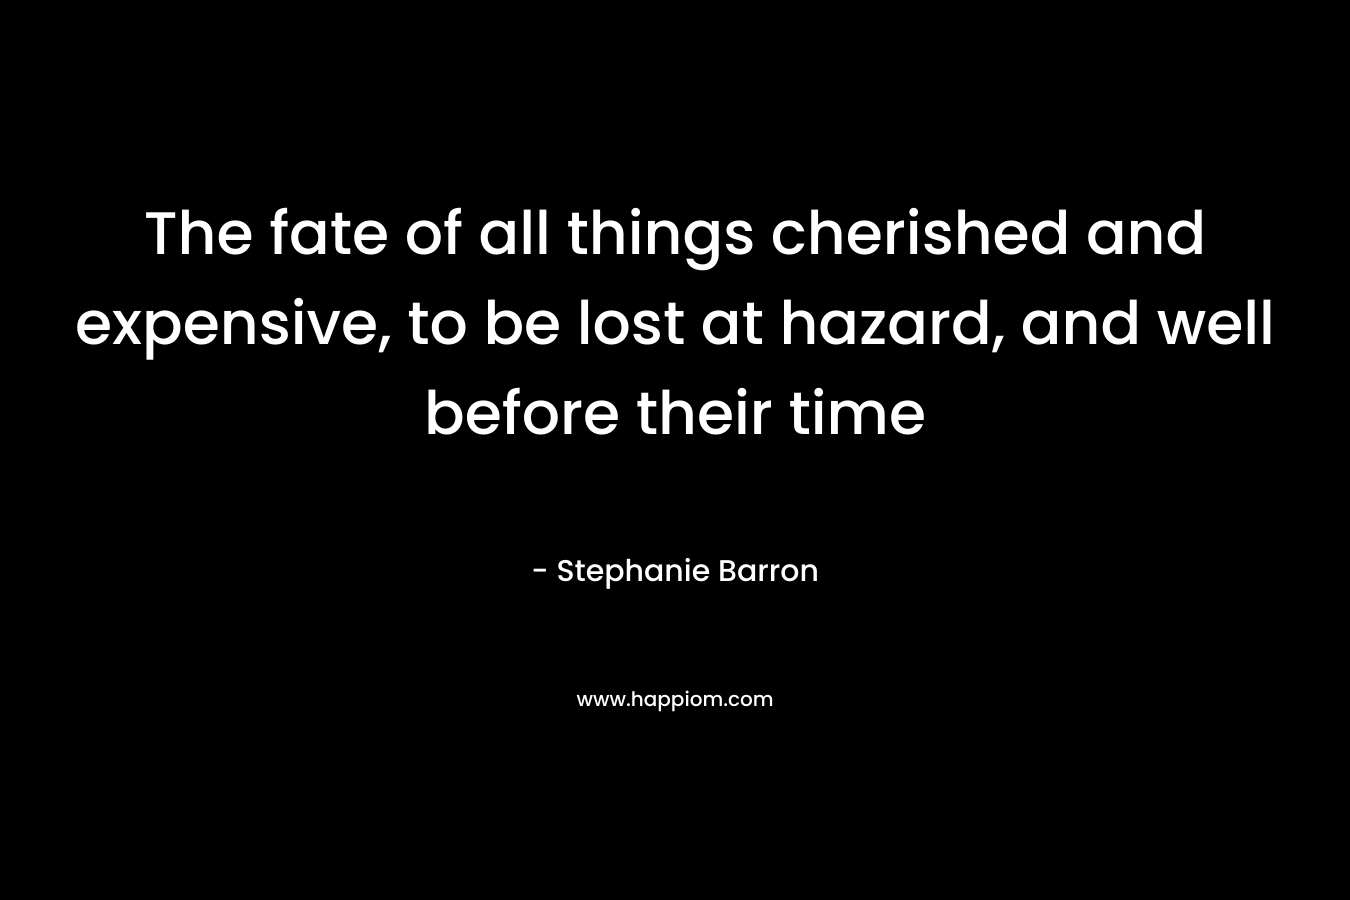 The fate of all things cherished and expensive, to be lost at hazard, and well before their time – Stephanie Barron